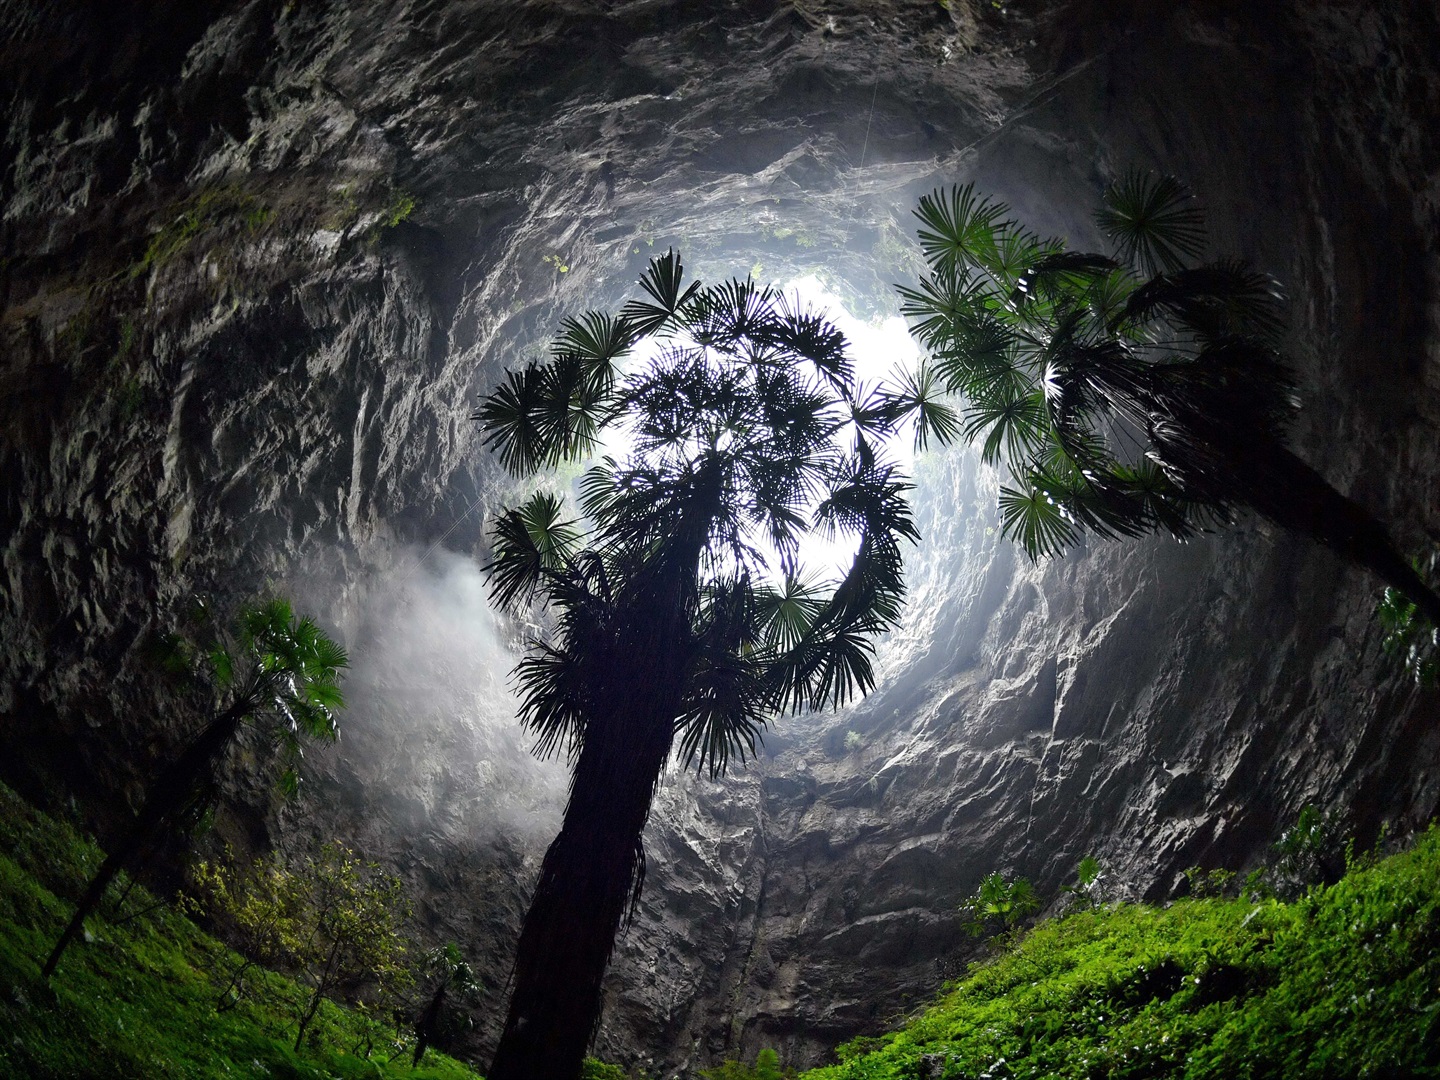 View from the bottom of a giant sinkhole in China.